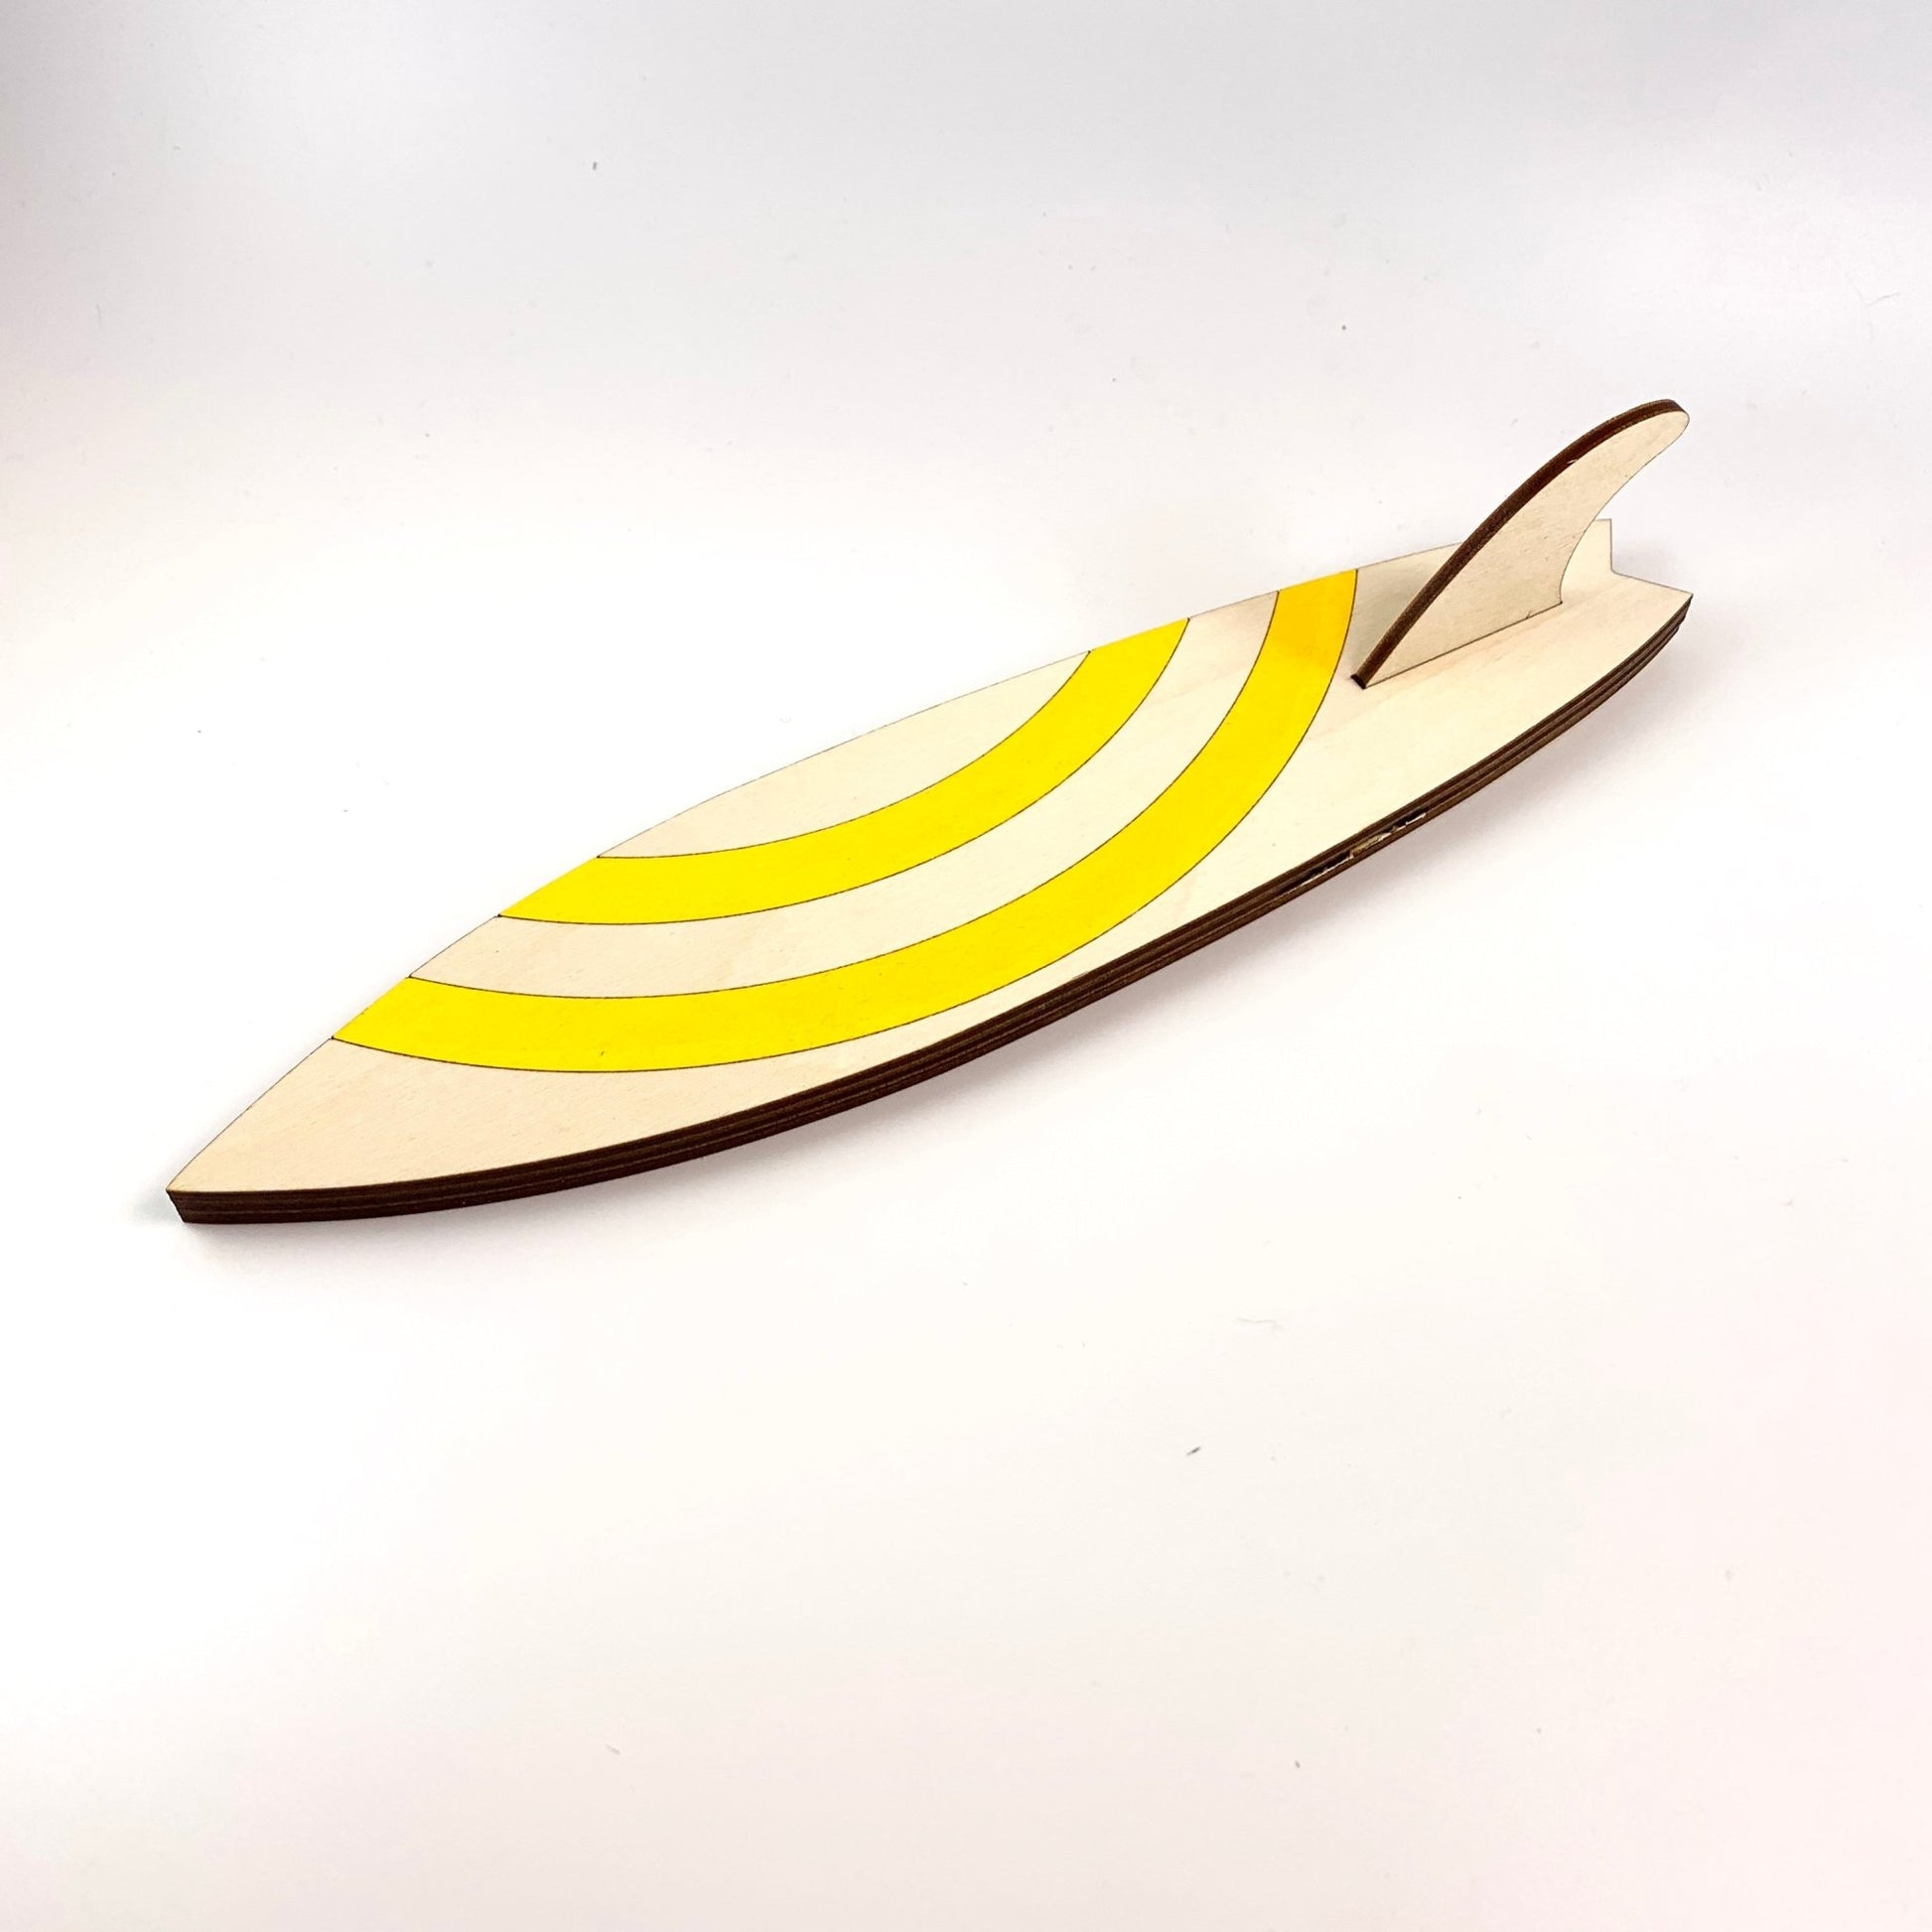 Surfboard Hooks - laser cut and laser engraved birch wood - yellow circular stripes - by LeeMo Designs in Bend, Oregon